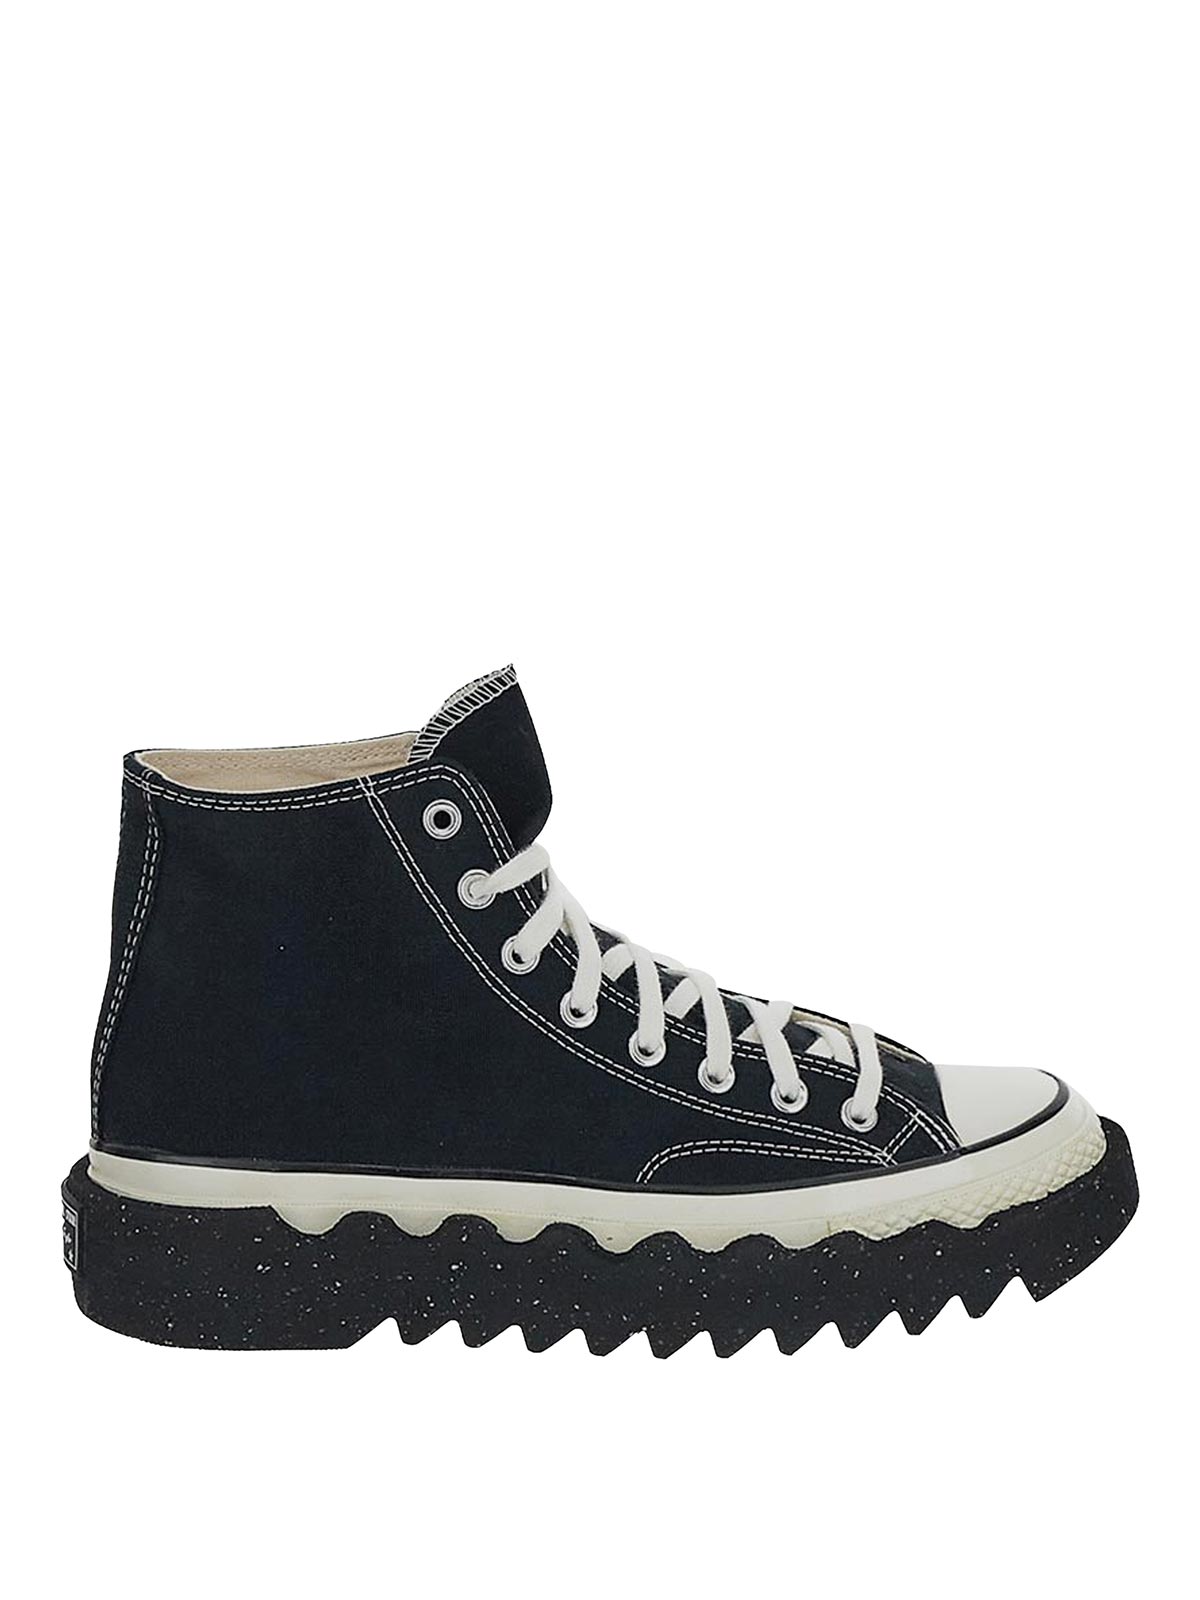 Converse High Top Sneakers In Black With Grooved Tread